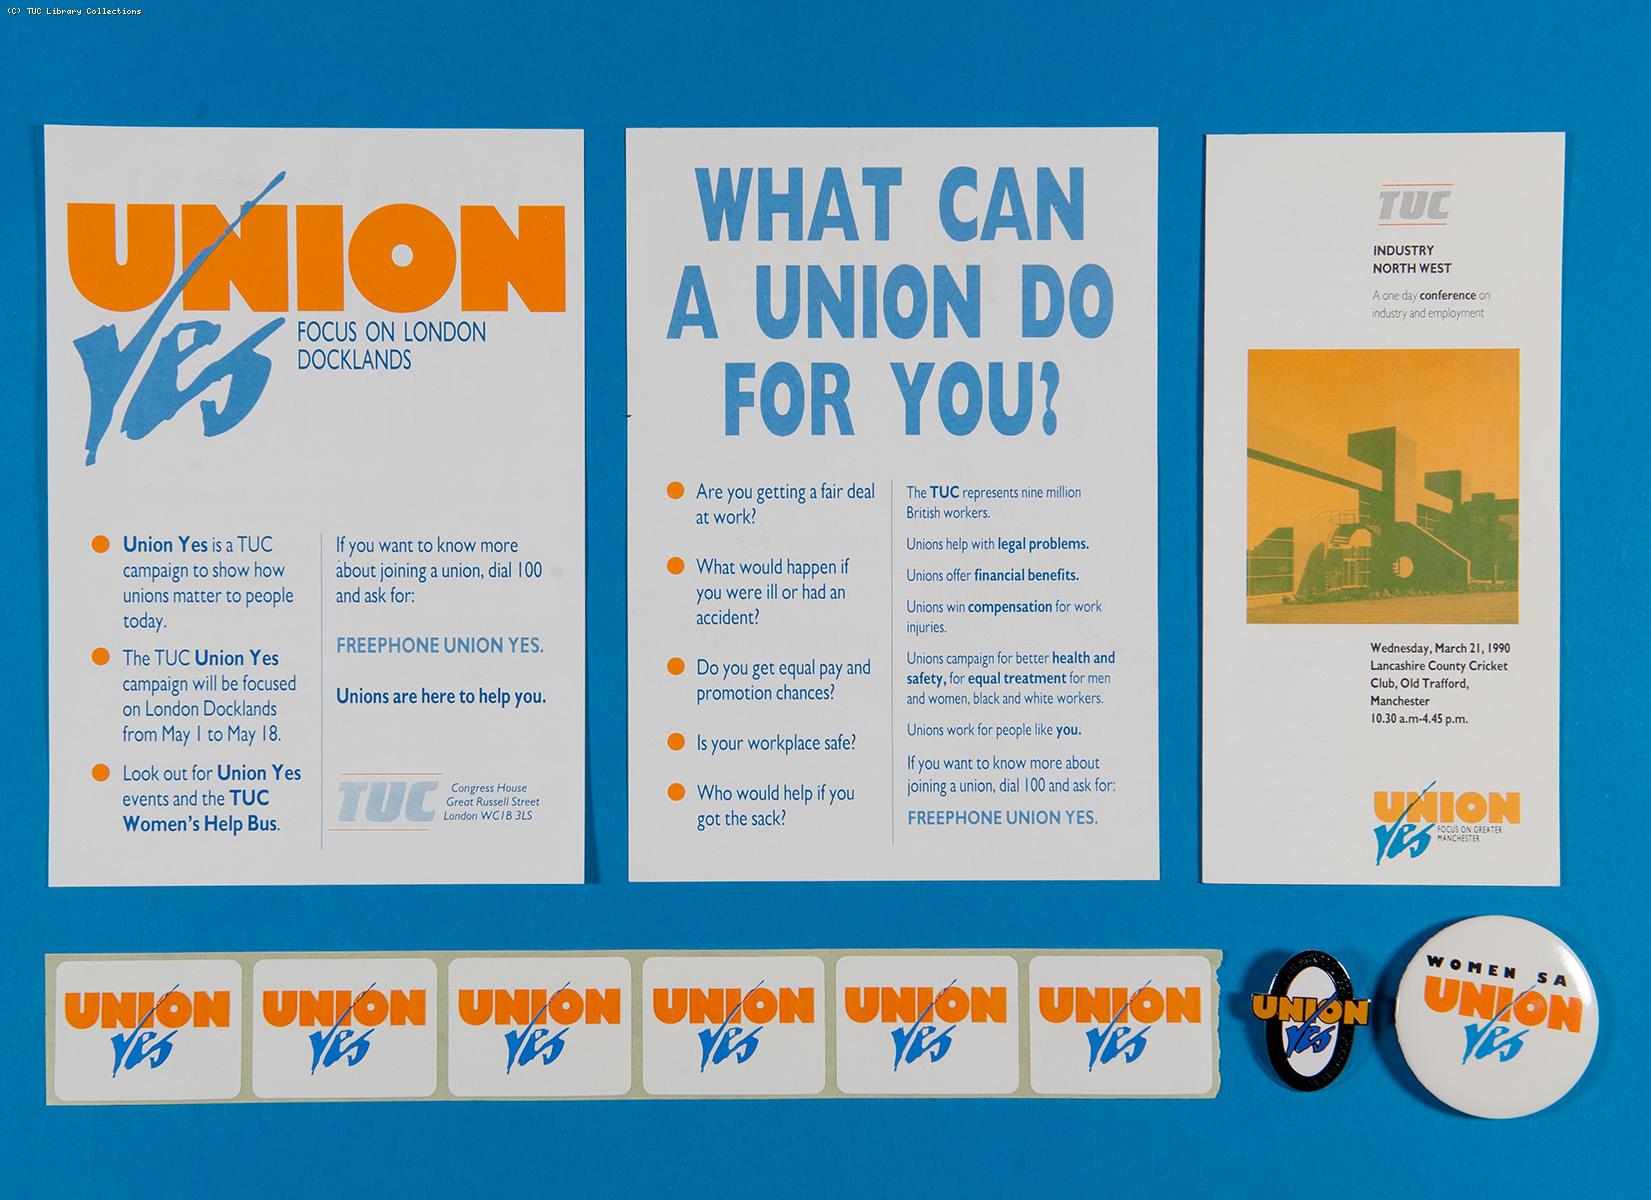 TUC Union Yes campaign, 1990